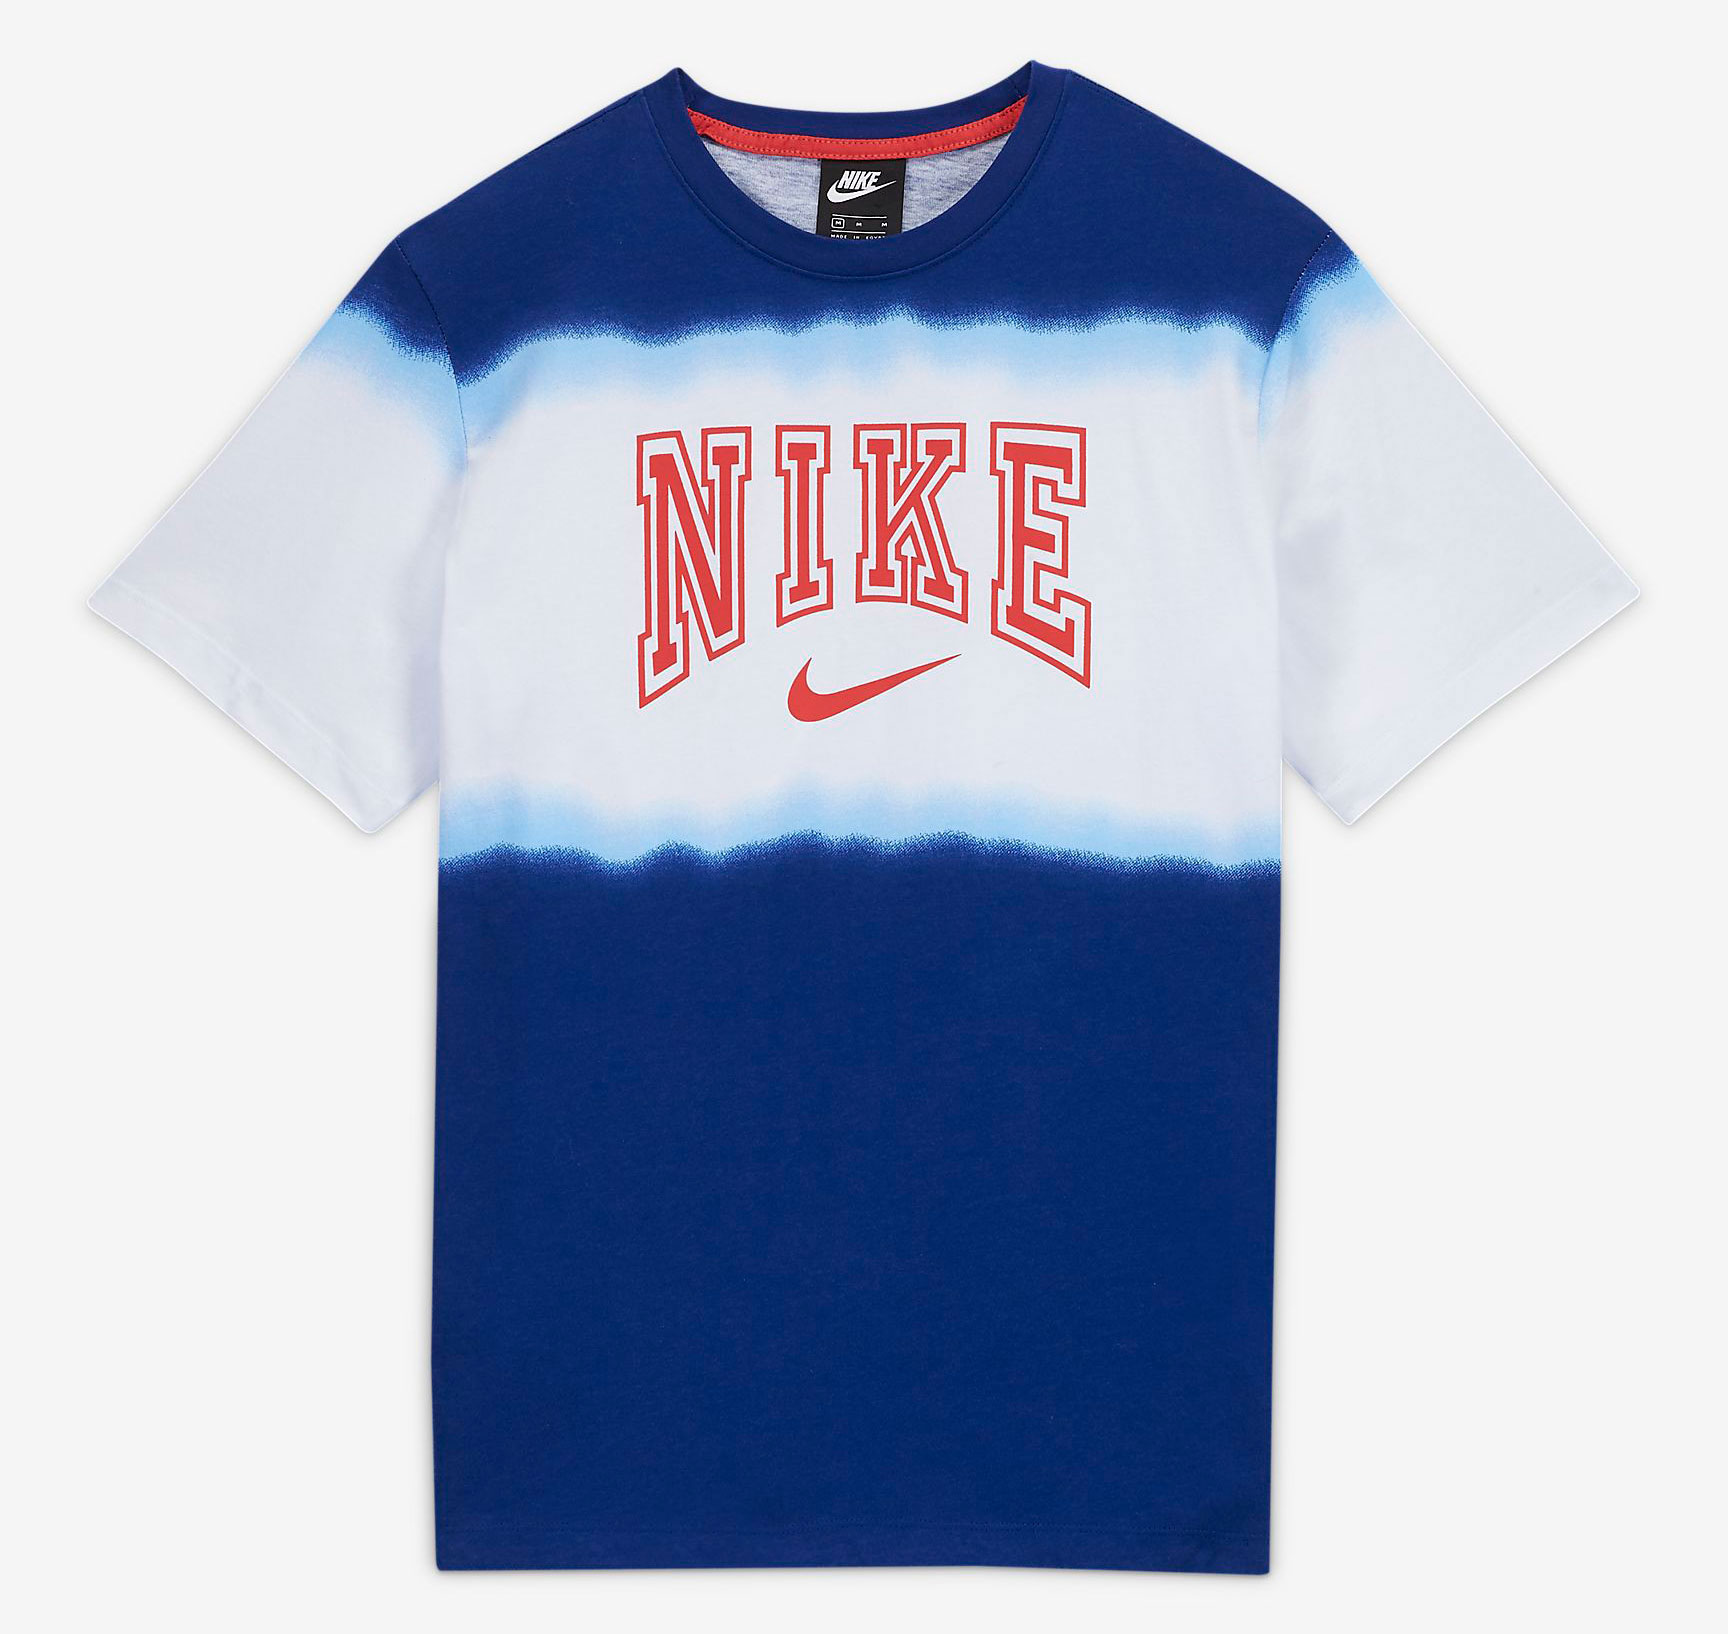 nike-kybrid-s2-what-the-usa-matching-shirt-1